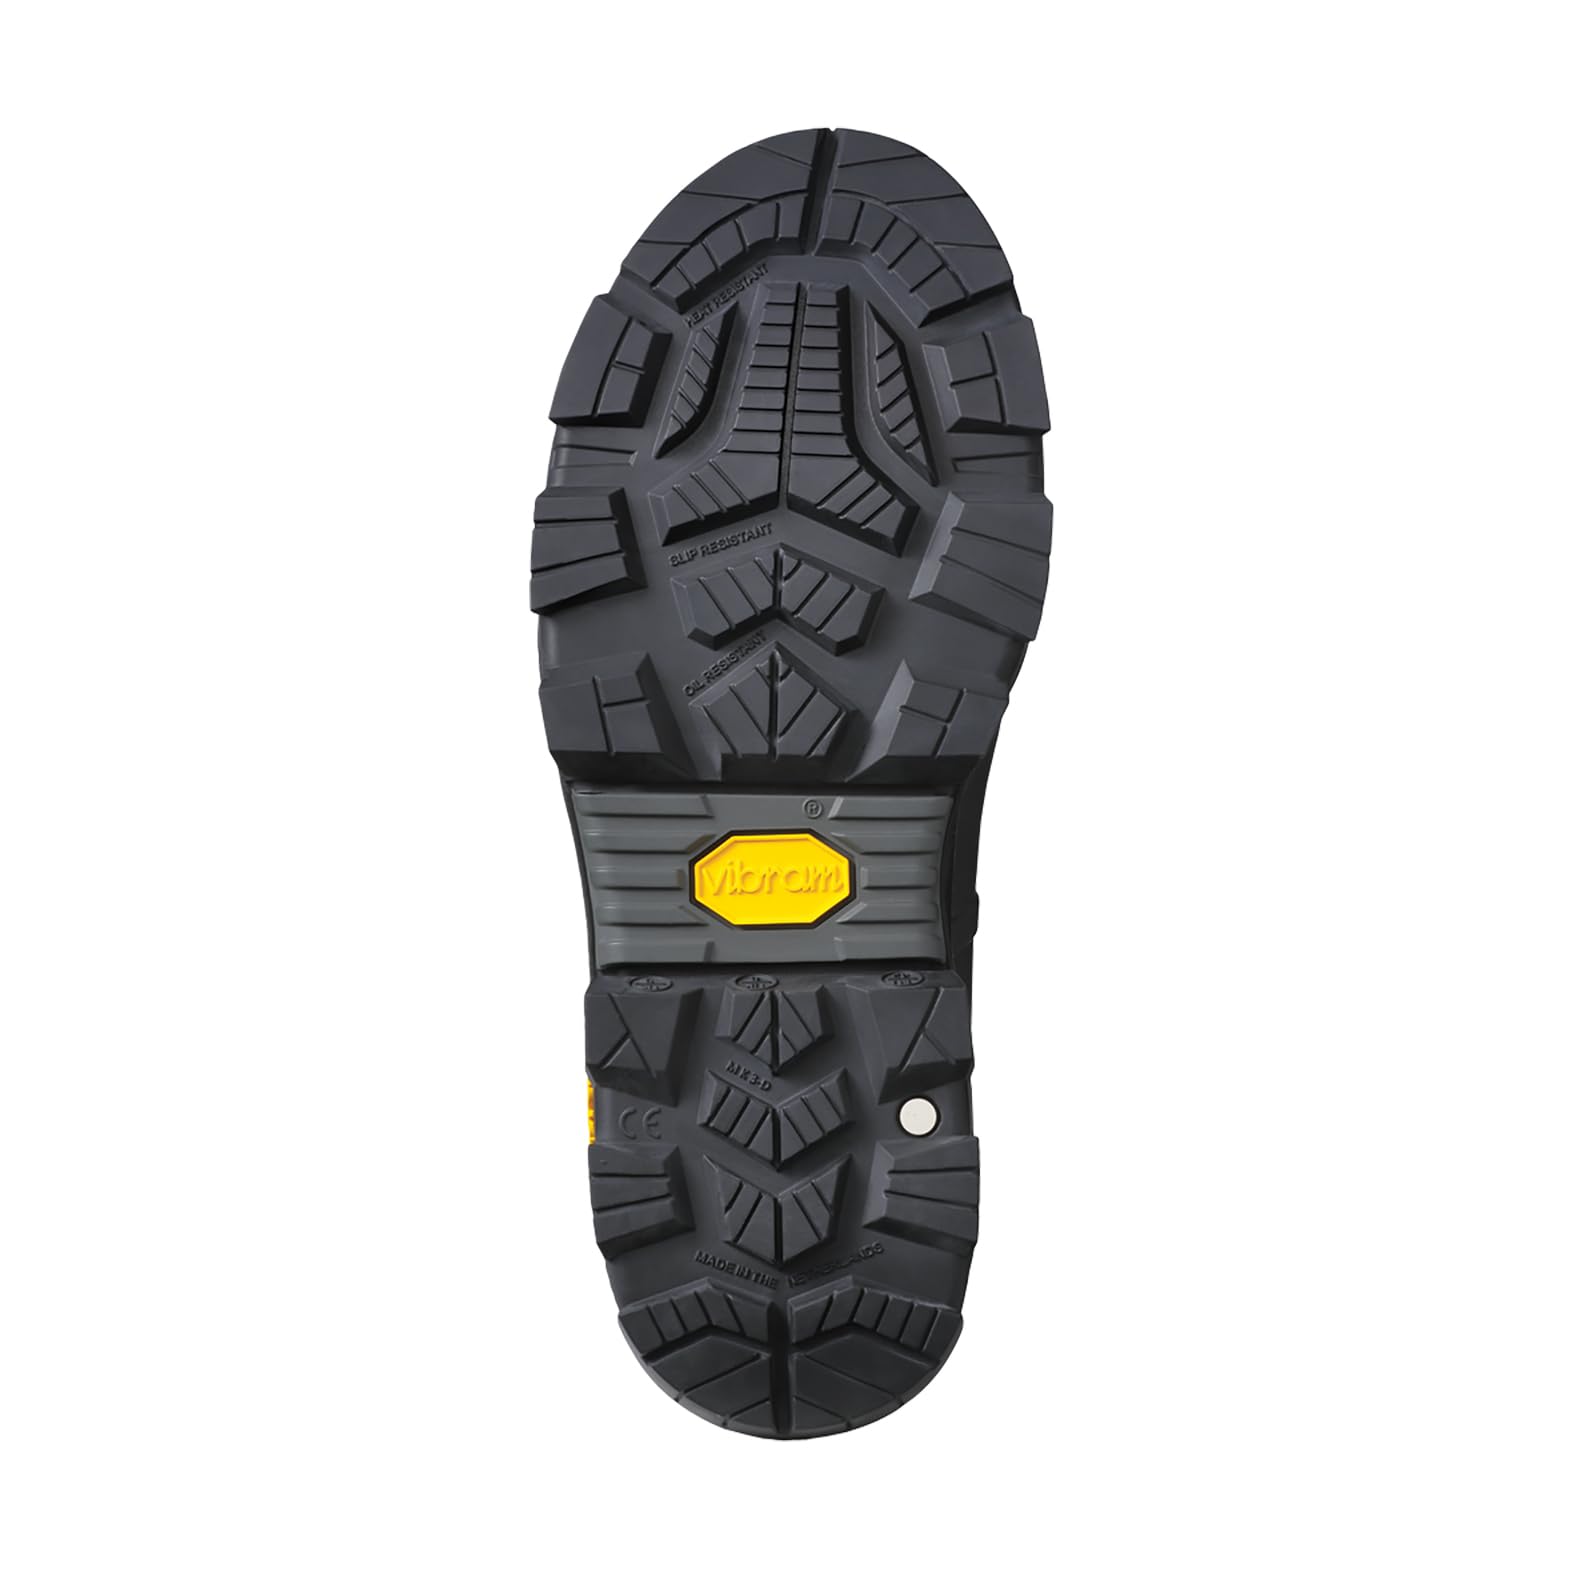 Dunlop Men's CC22A33 Purofort+ Expander Full Safety with Vibram Sole,100% Waterproof,PVC, Lightweight and Durable Protective Footwear, Black, 8